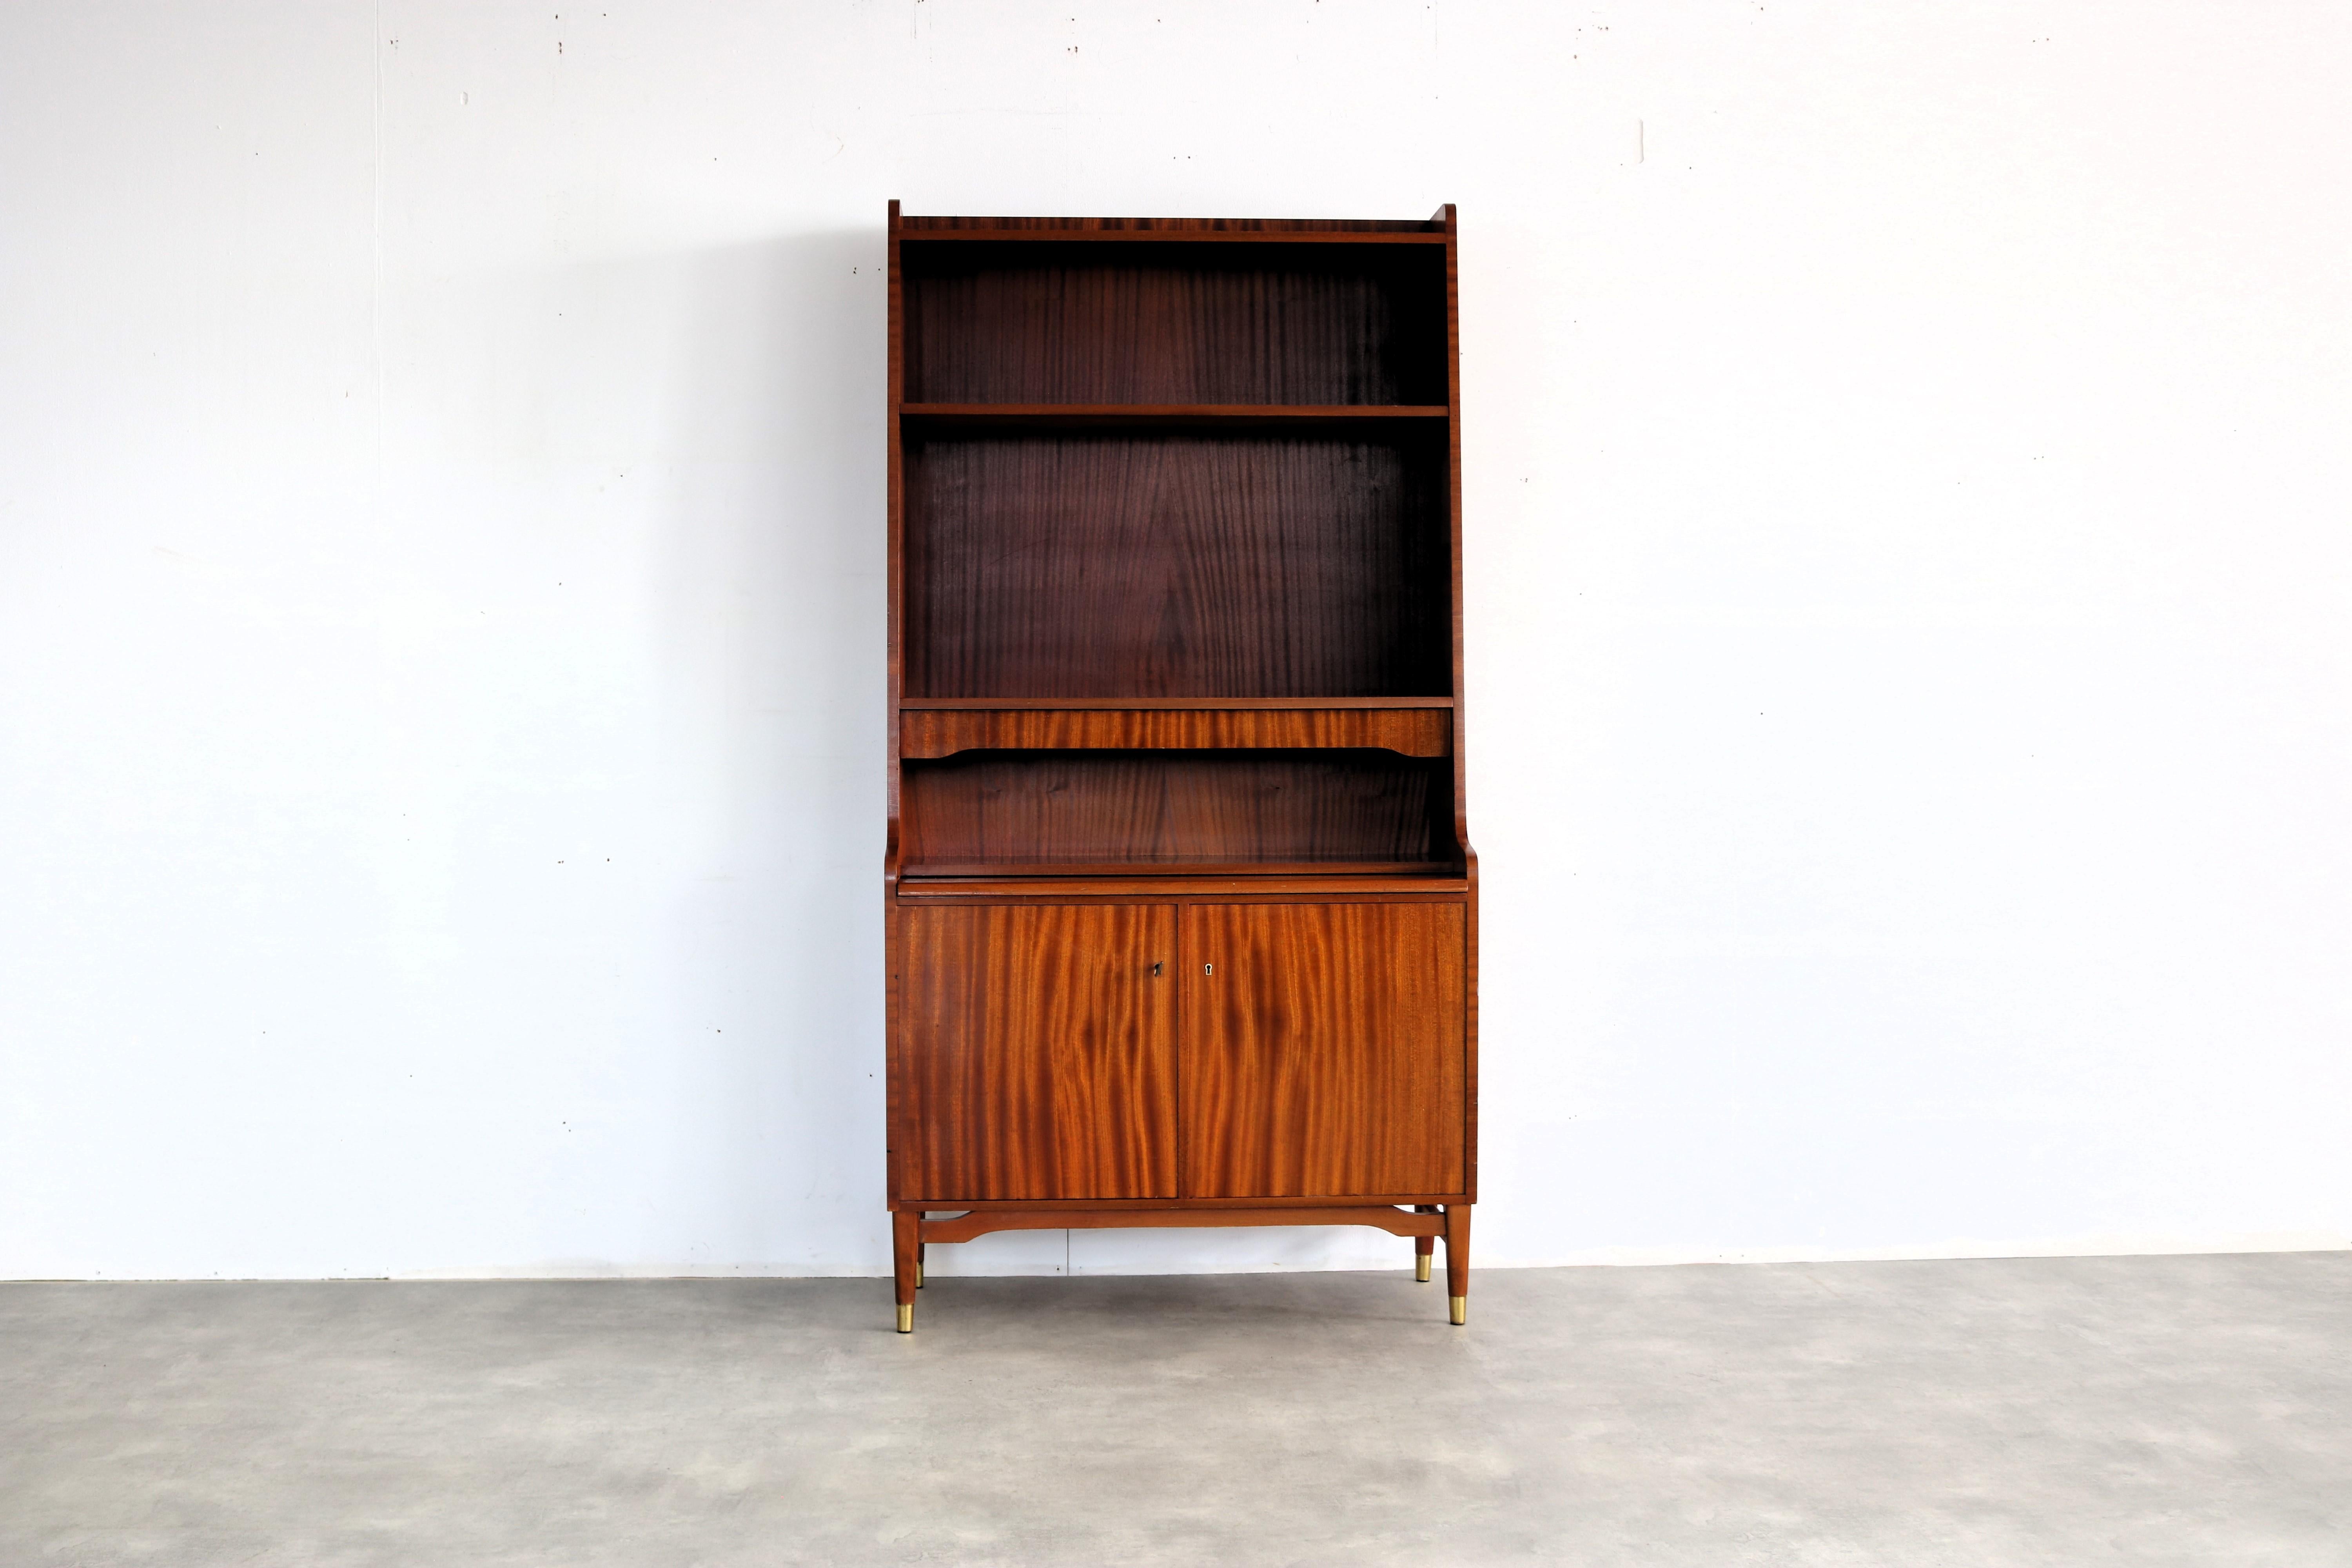 vintage secretary | wall cupboard | 60s | Sweden

period | 60's
design | unknown | Sweden
condition | good | light signs of use | veneer traces on the back
size | 186 x 95 x 42 (hxwxd)

details | teak; brass;

article number | 2185